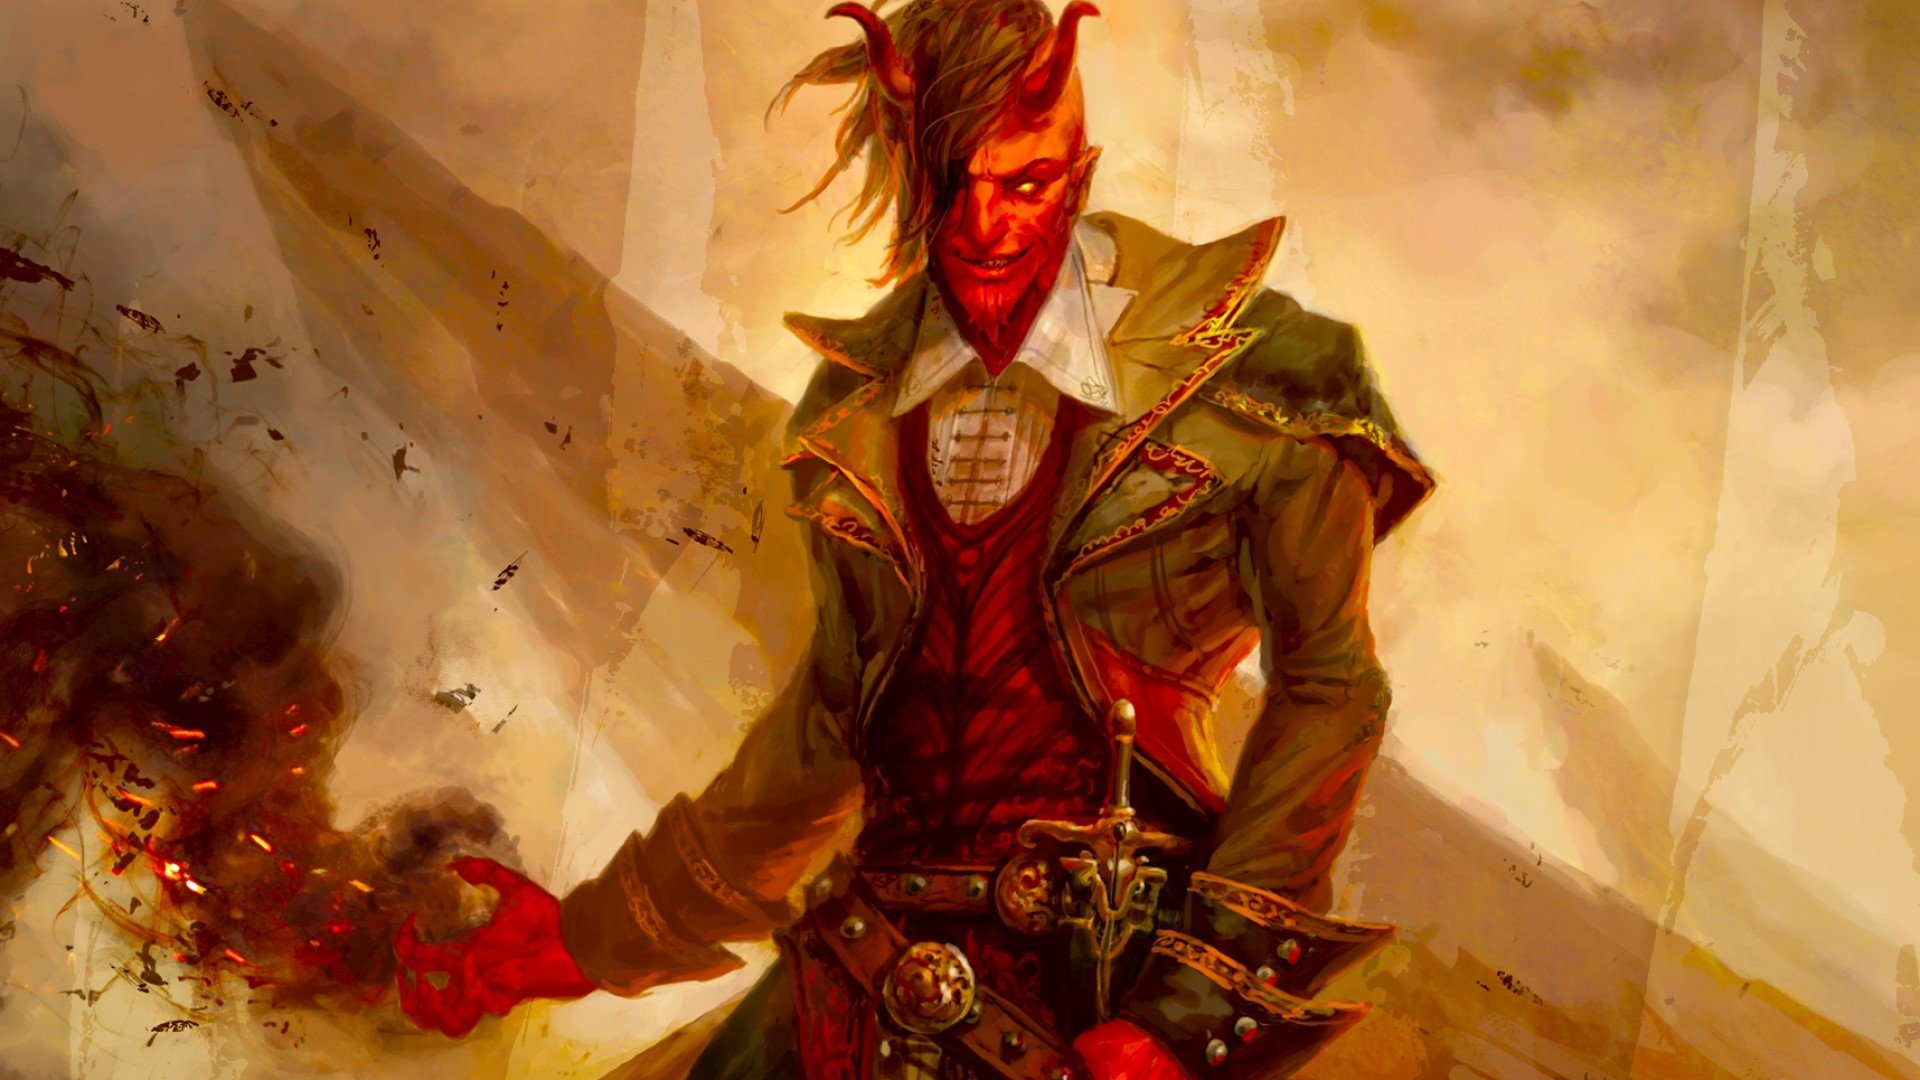 DnD Blood Hunter 5e - red demon humanoid wielding magic (art by Wizards of the Coast)